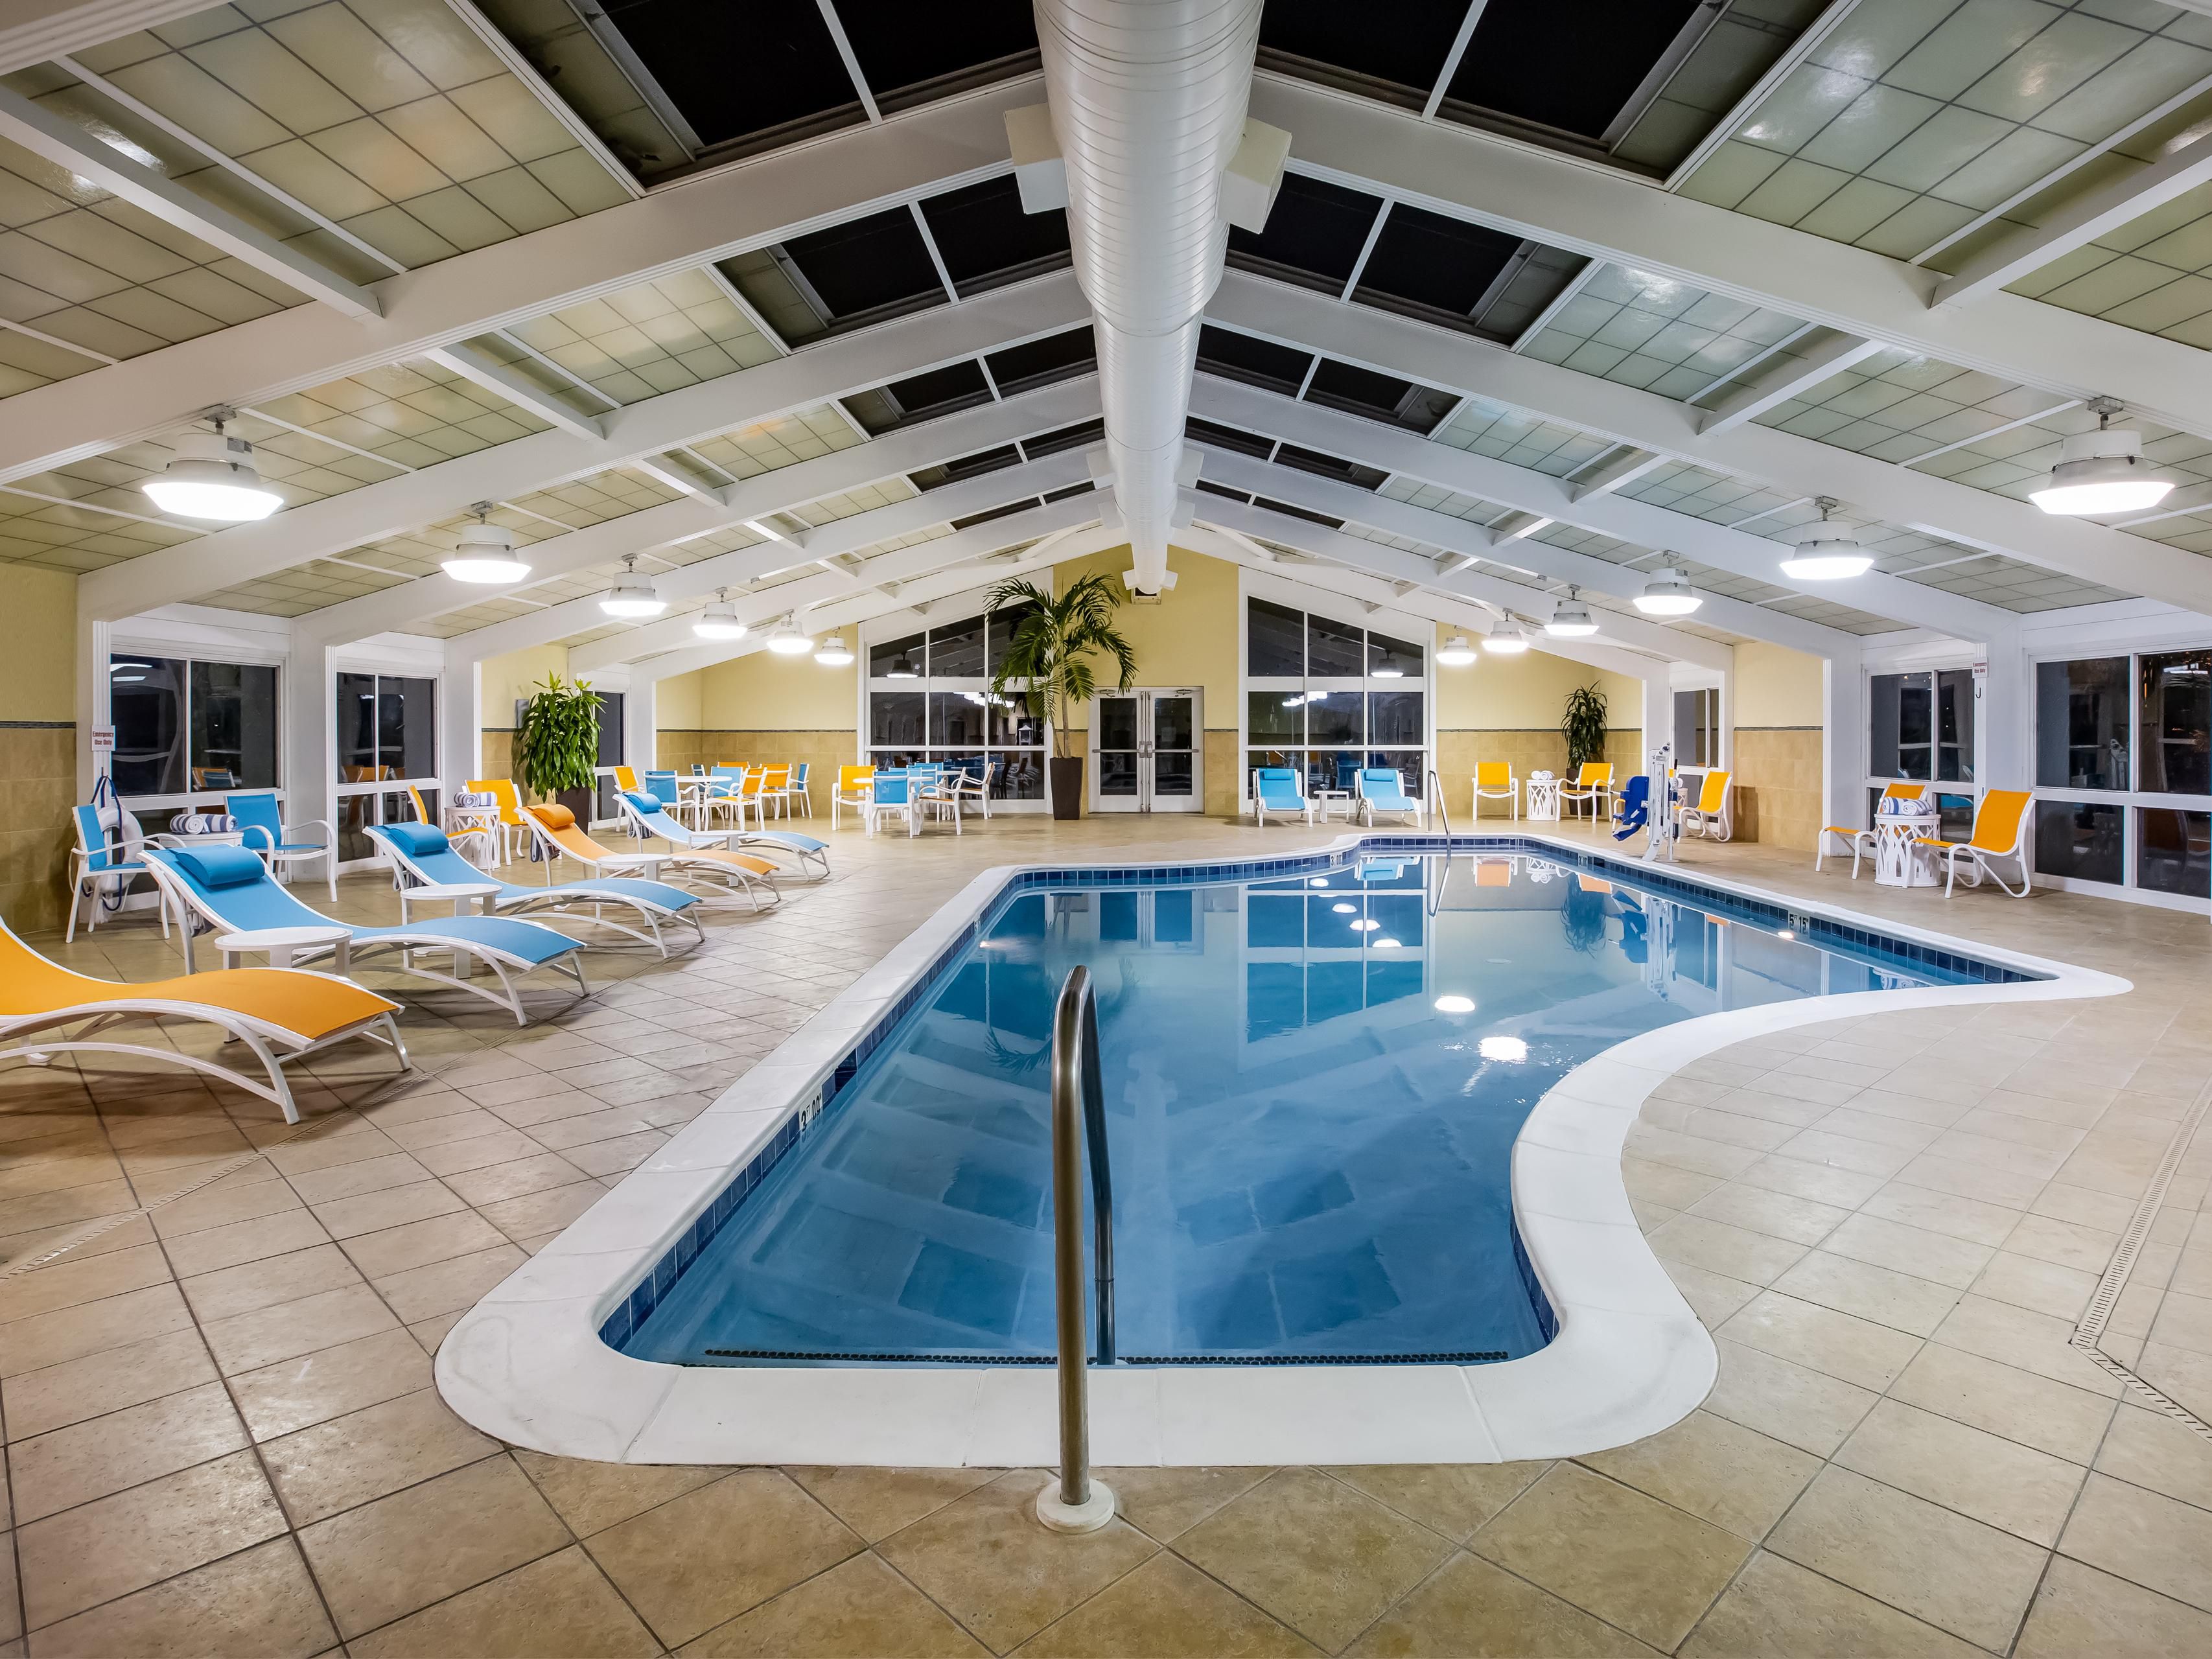 No stay at the Holiday Inn Gulfport would be complete without going for a dip in our large indoor swimming pool!  Keep the kids entertained when you're not out exploring, or just enjoy a relaxing soak.